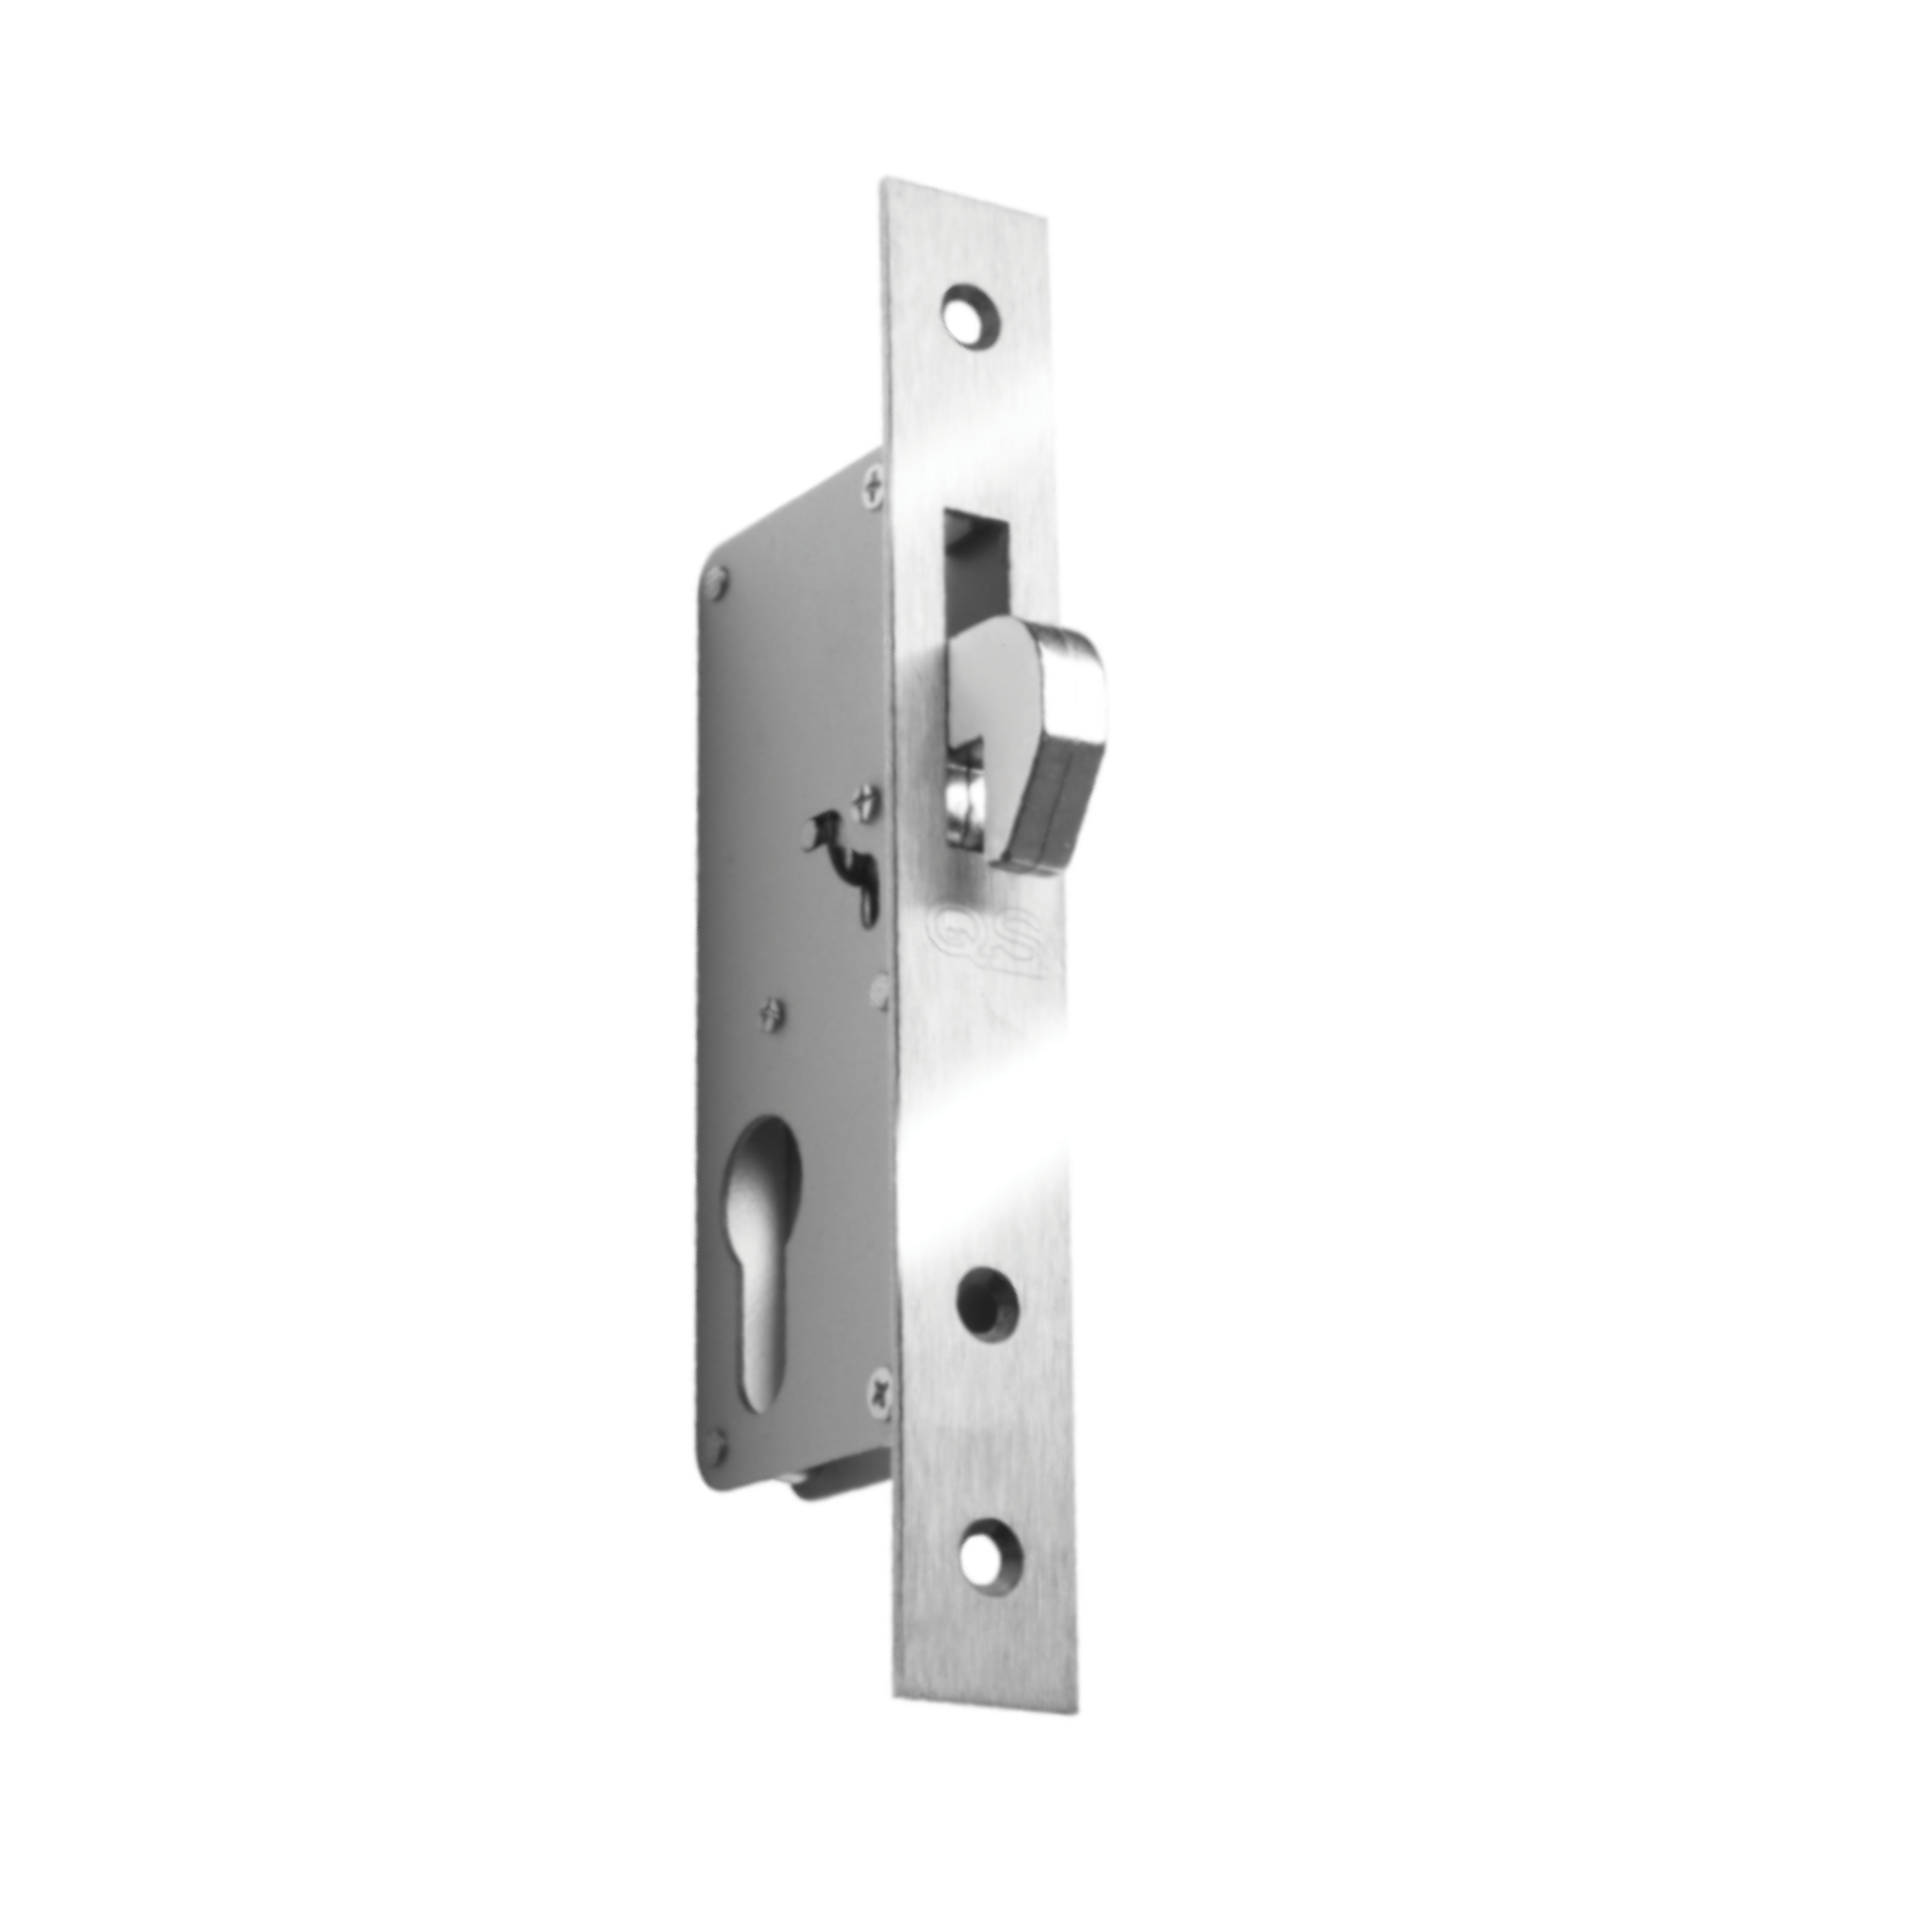 QS6235SS, Hook Lock, Euro Cylinder, Excluding Cylinder, 35mm (Backset), 62mm (ctc), Stainless Steel, QS